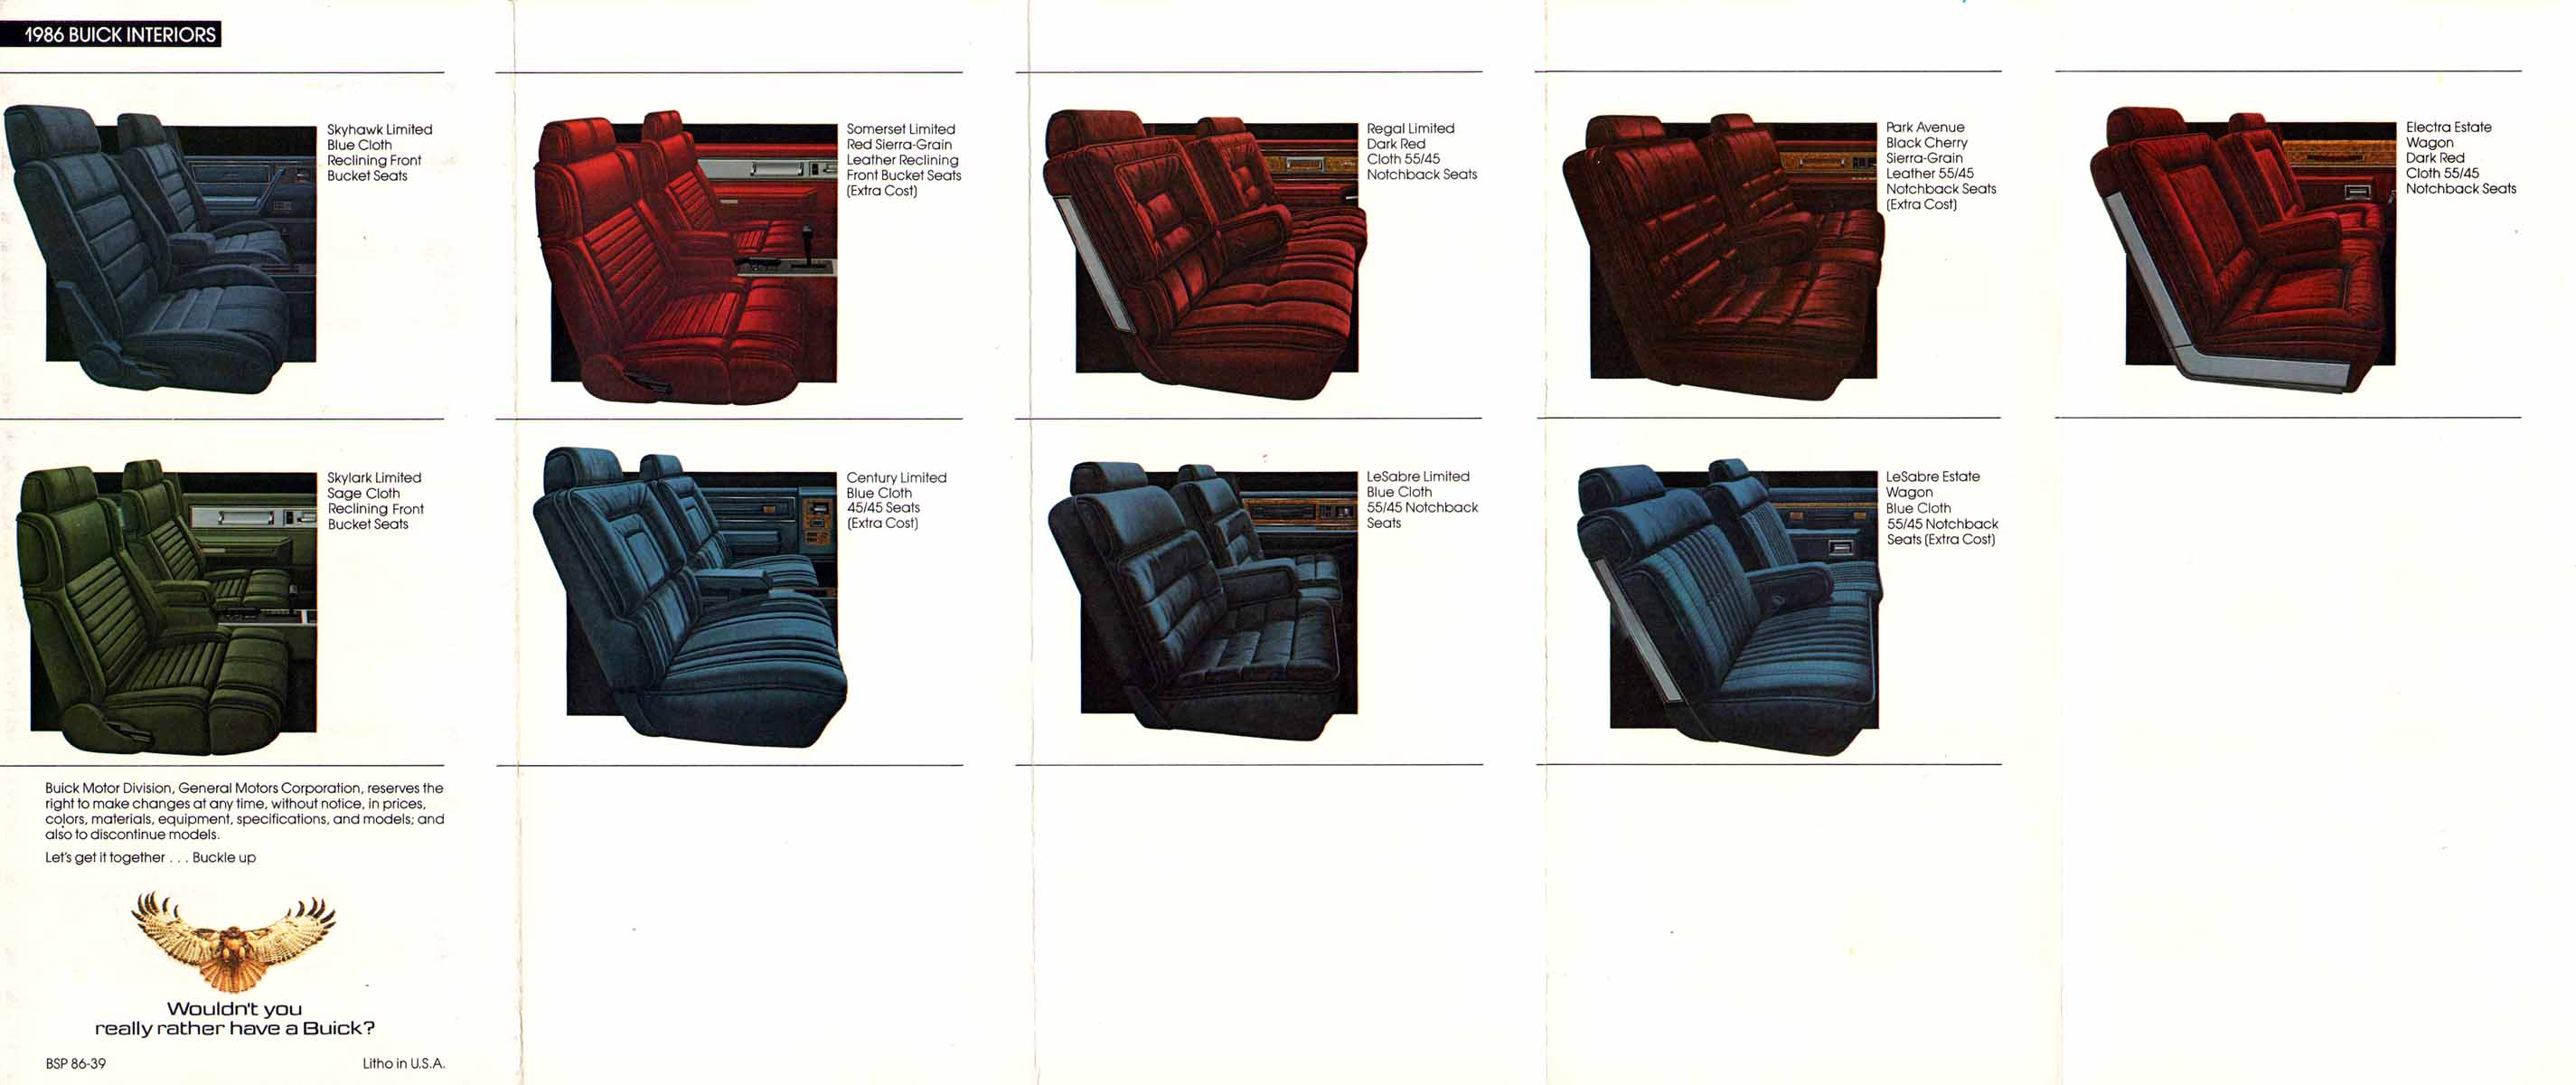 1986 Buick Exterior Colors-08 to 12